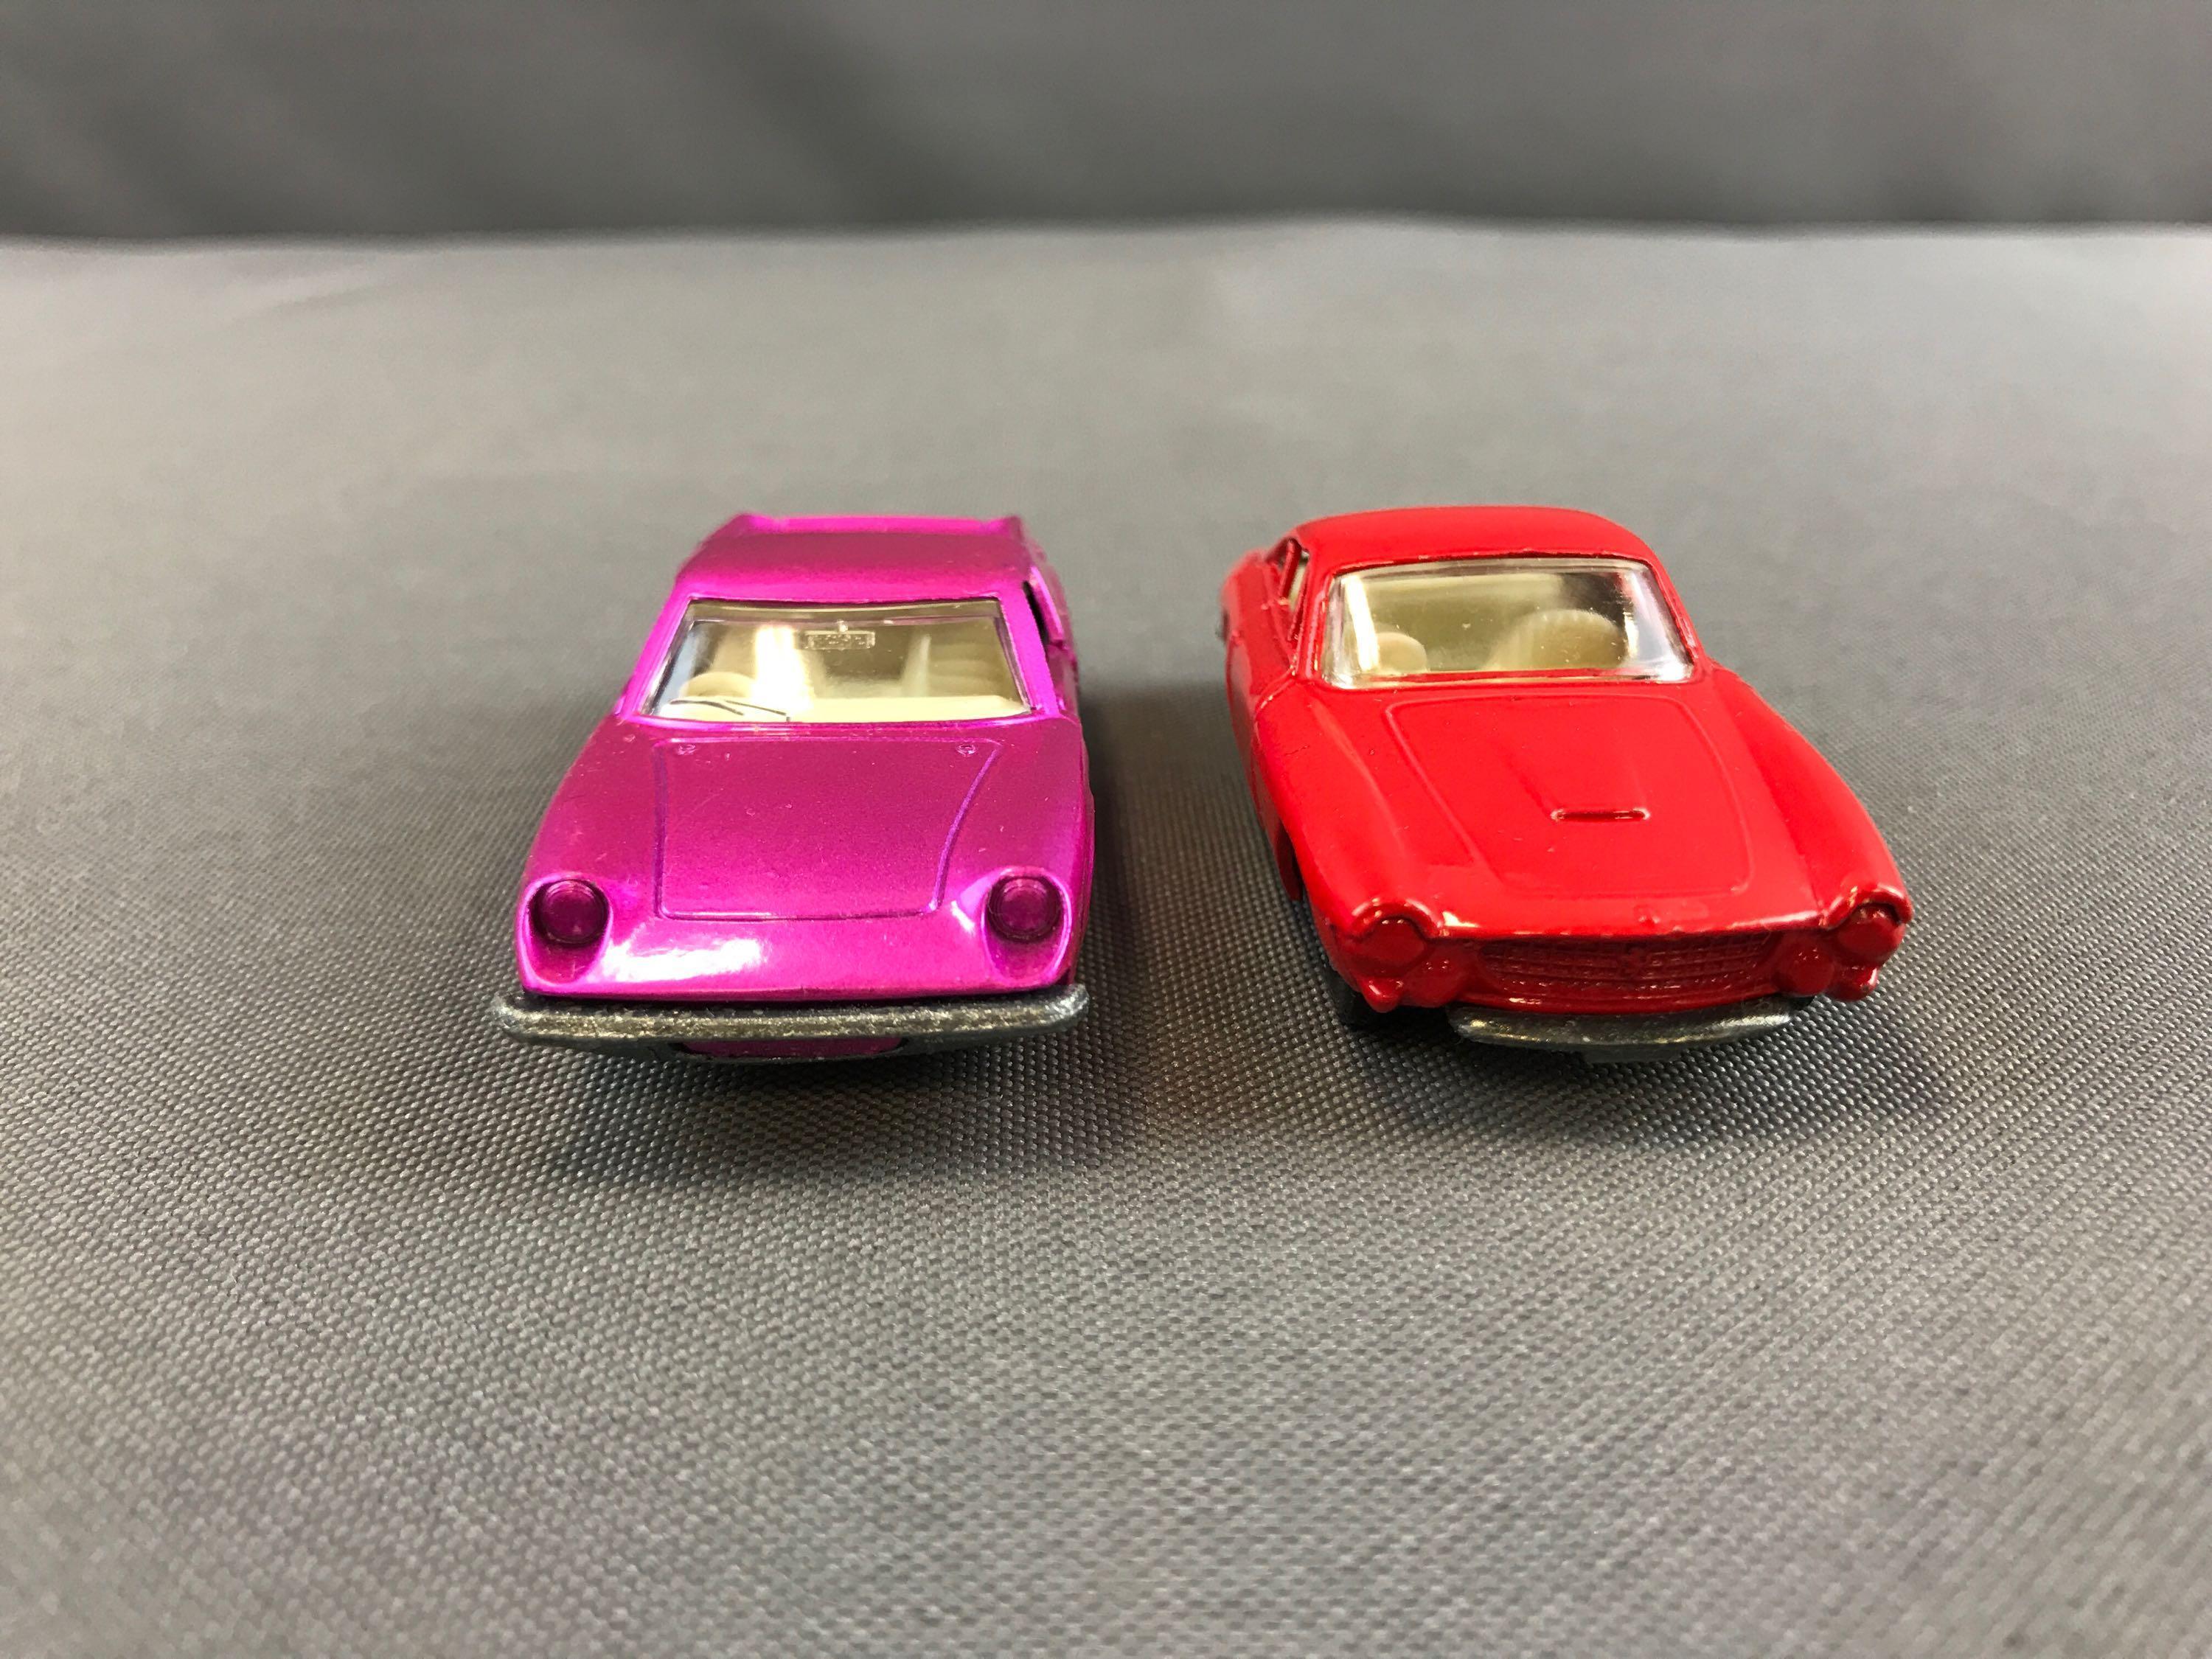 Group of 2 Matchbox Superfast die cast vehicles No. 5 and 75 with Original Boxes